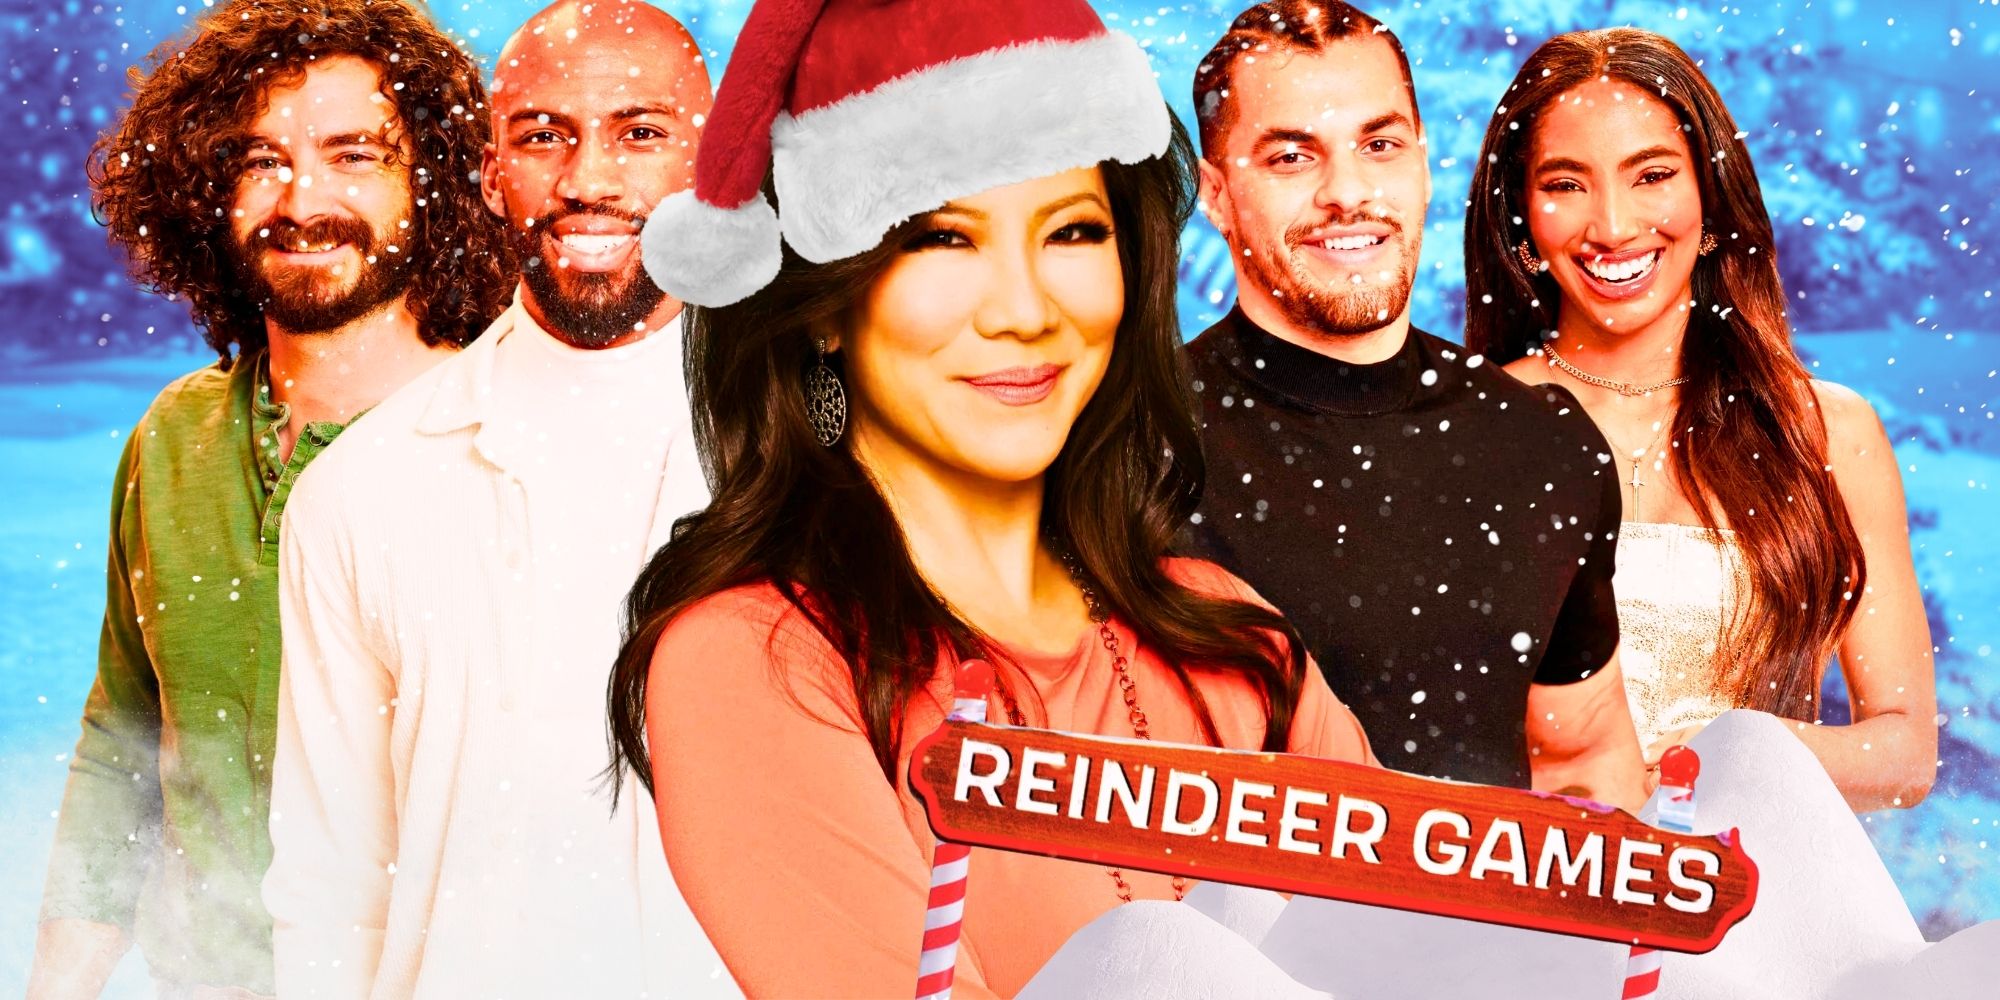 CBS Announces 'Big Brother Reindeer Games' Holiday Special - Parade